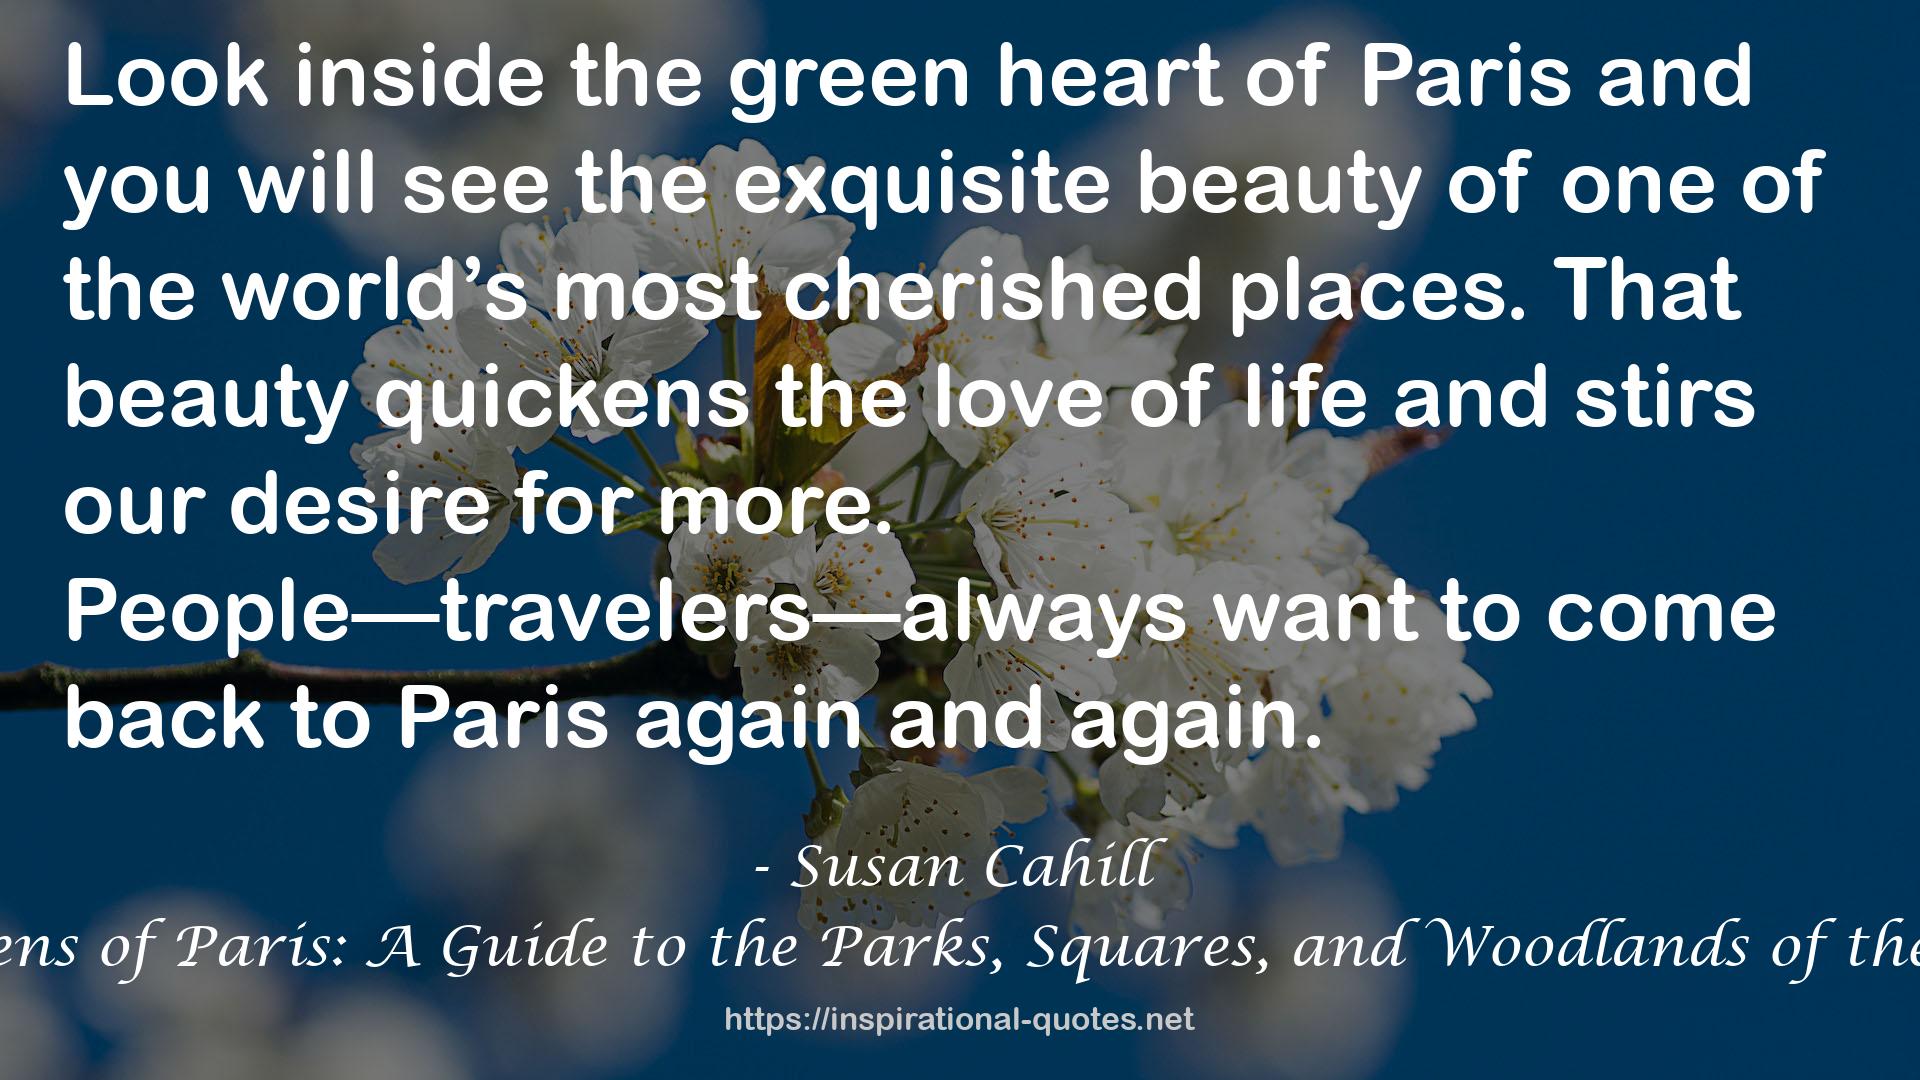 Hidden Gardens of Paris: A Guide to the Parks, Squares, and Woodlands of the City of Light QUOTES